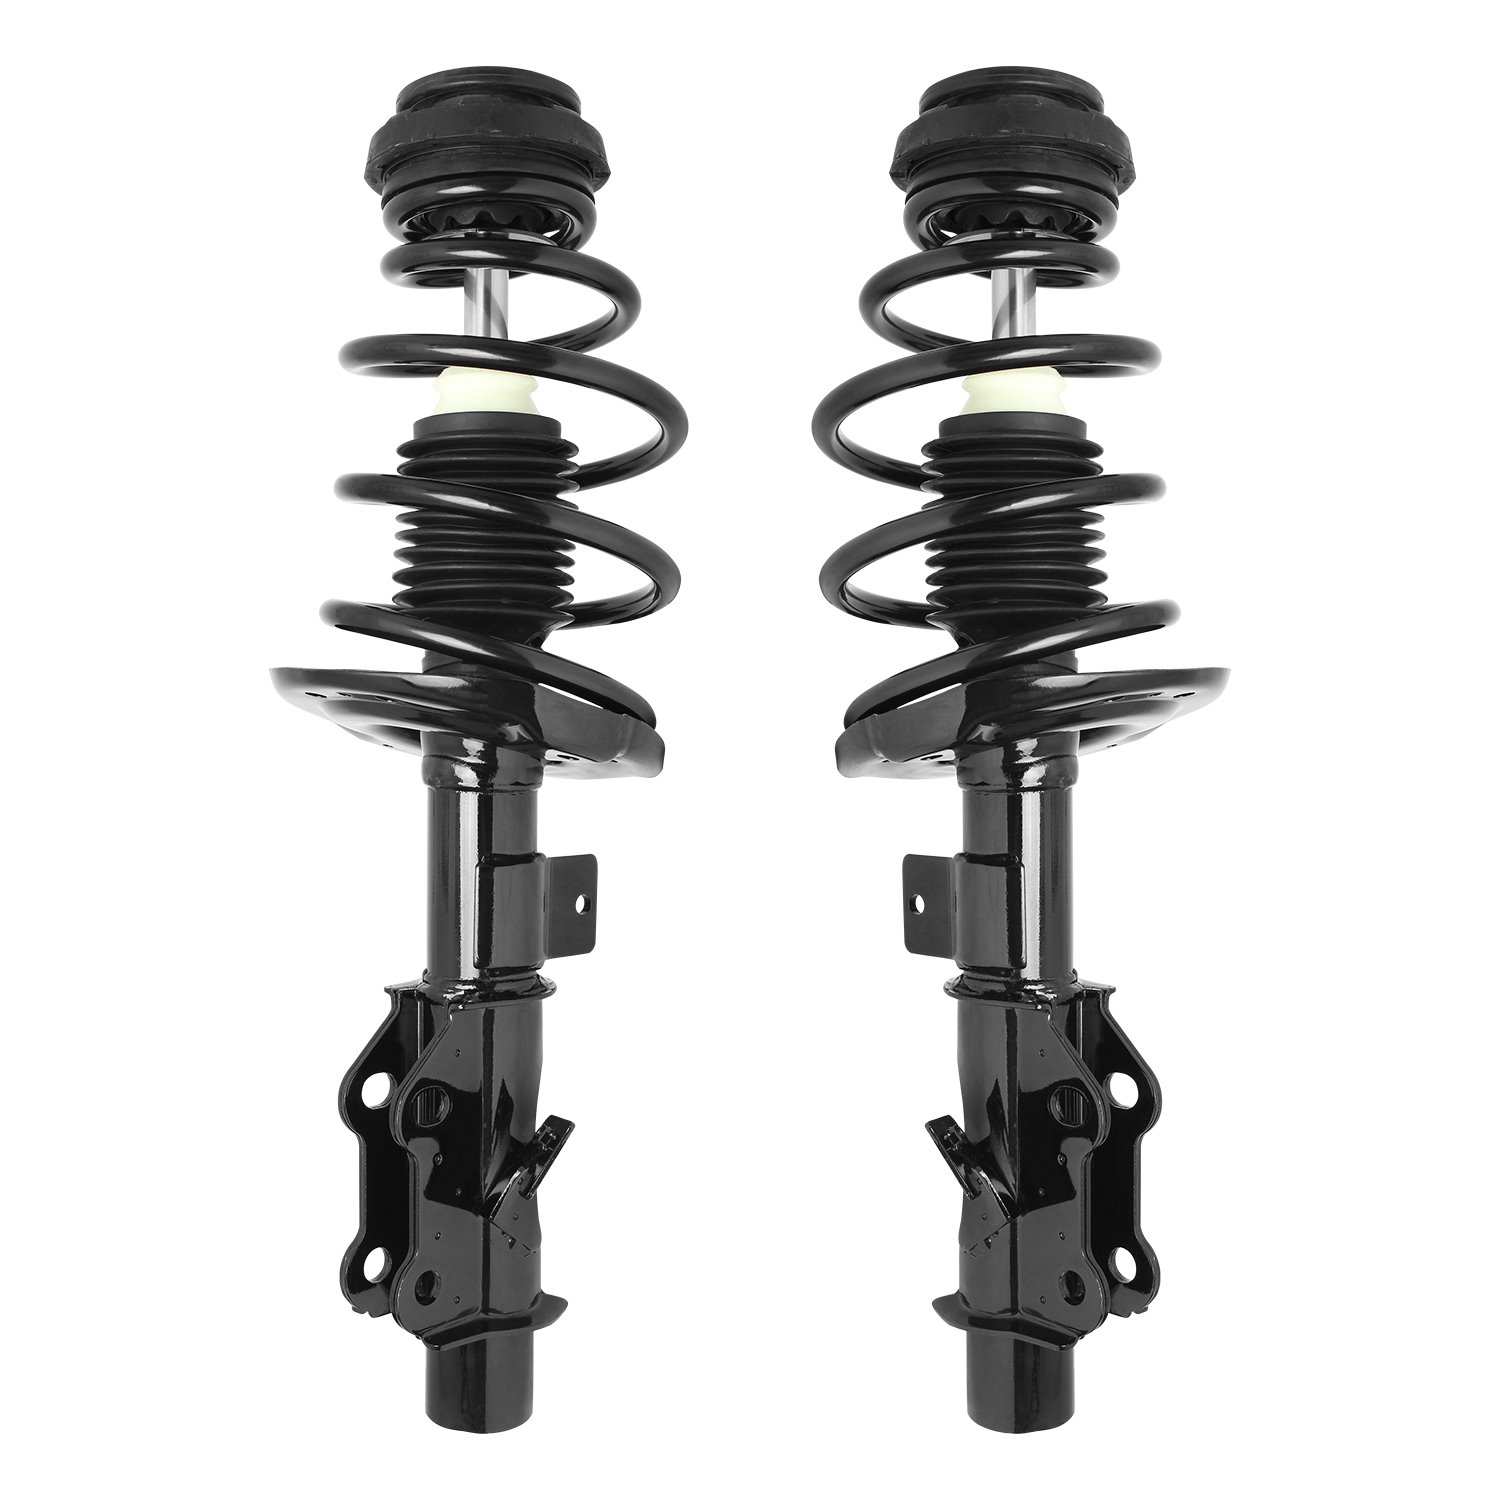 2-11625-11626-001 Suspension Strut & Coil Spring Assembly Set Fits Select Chevy Camaro